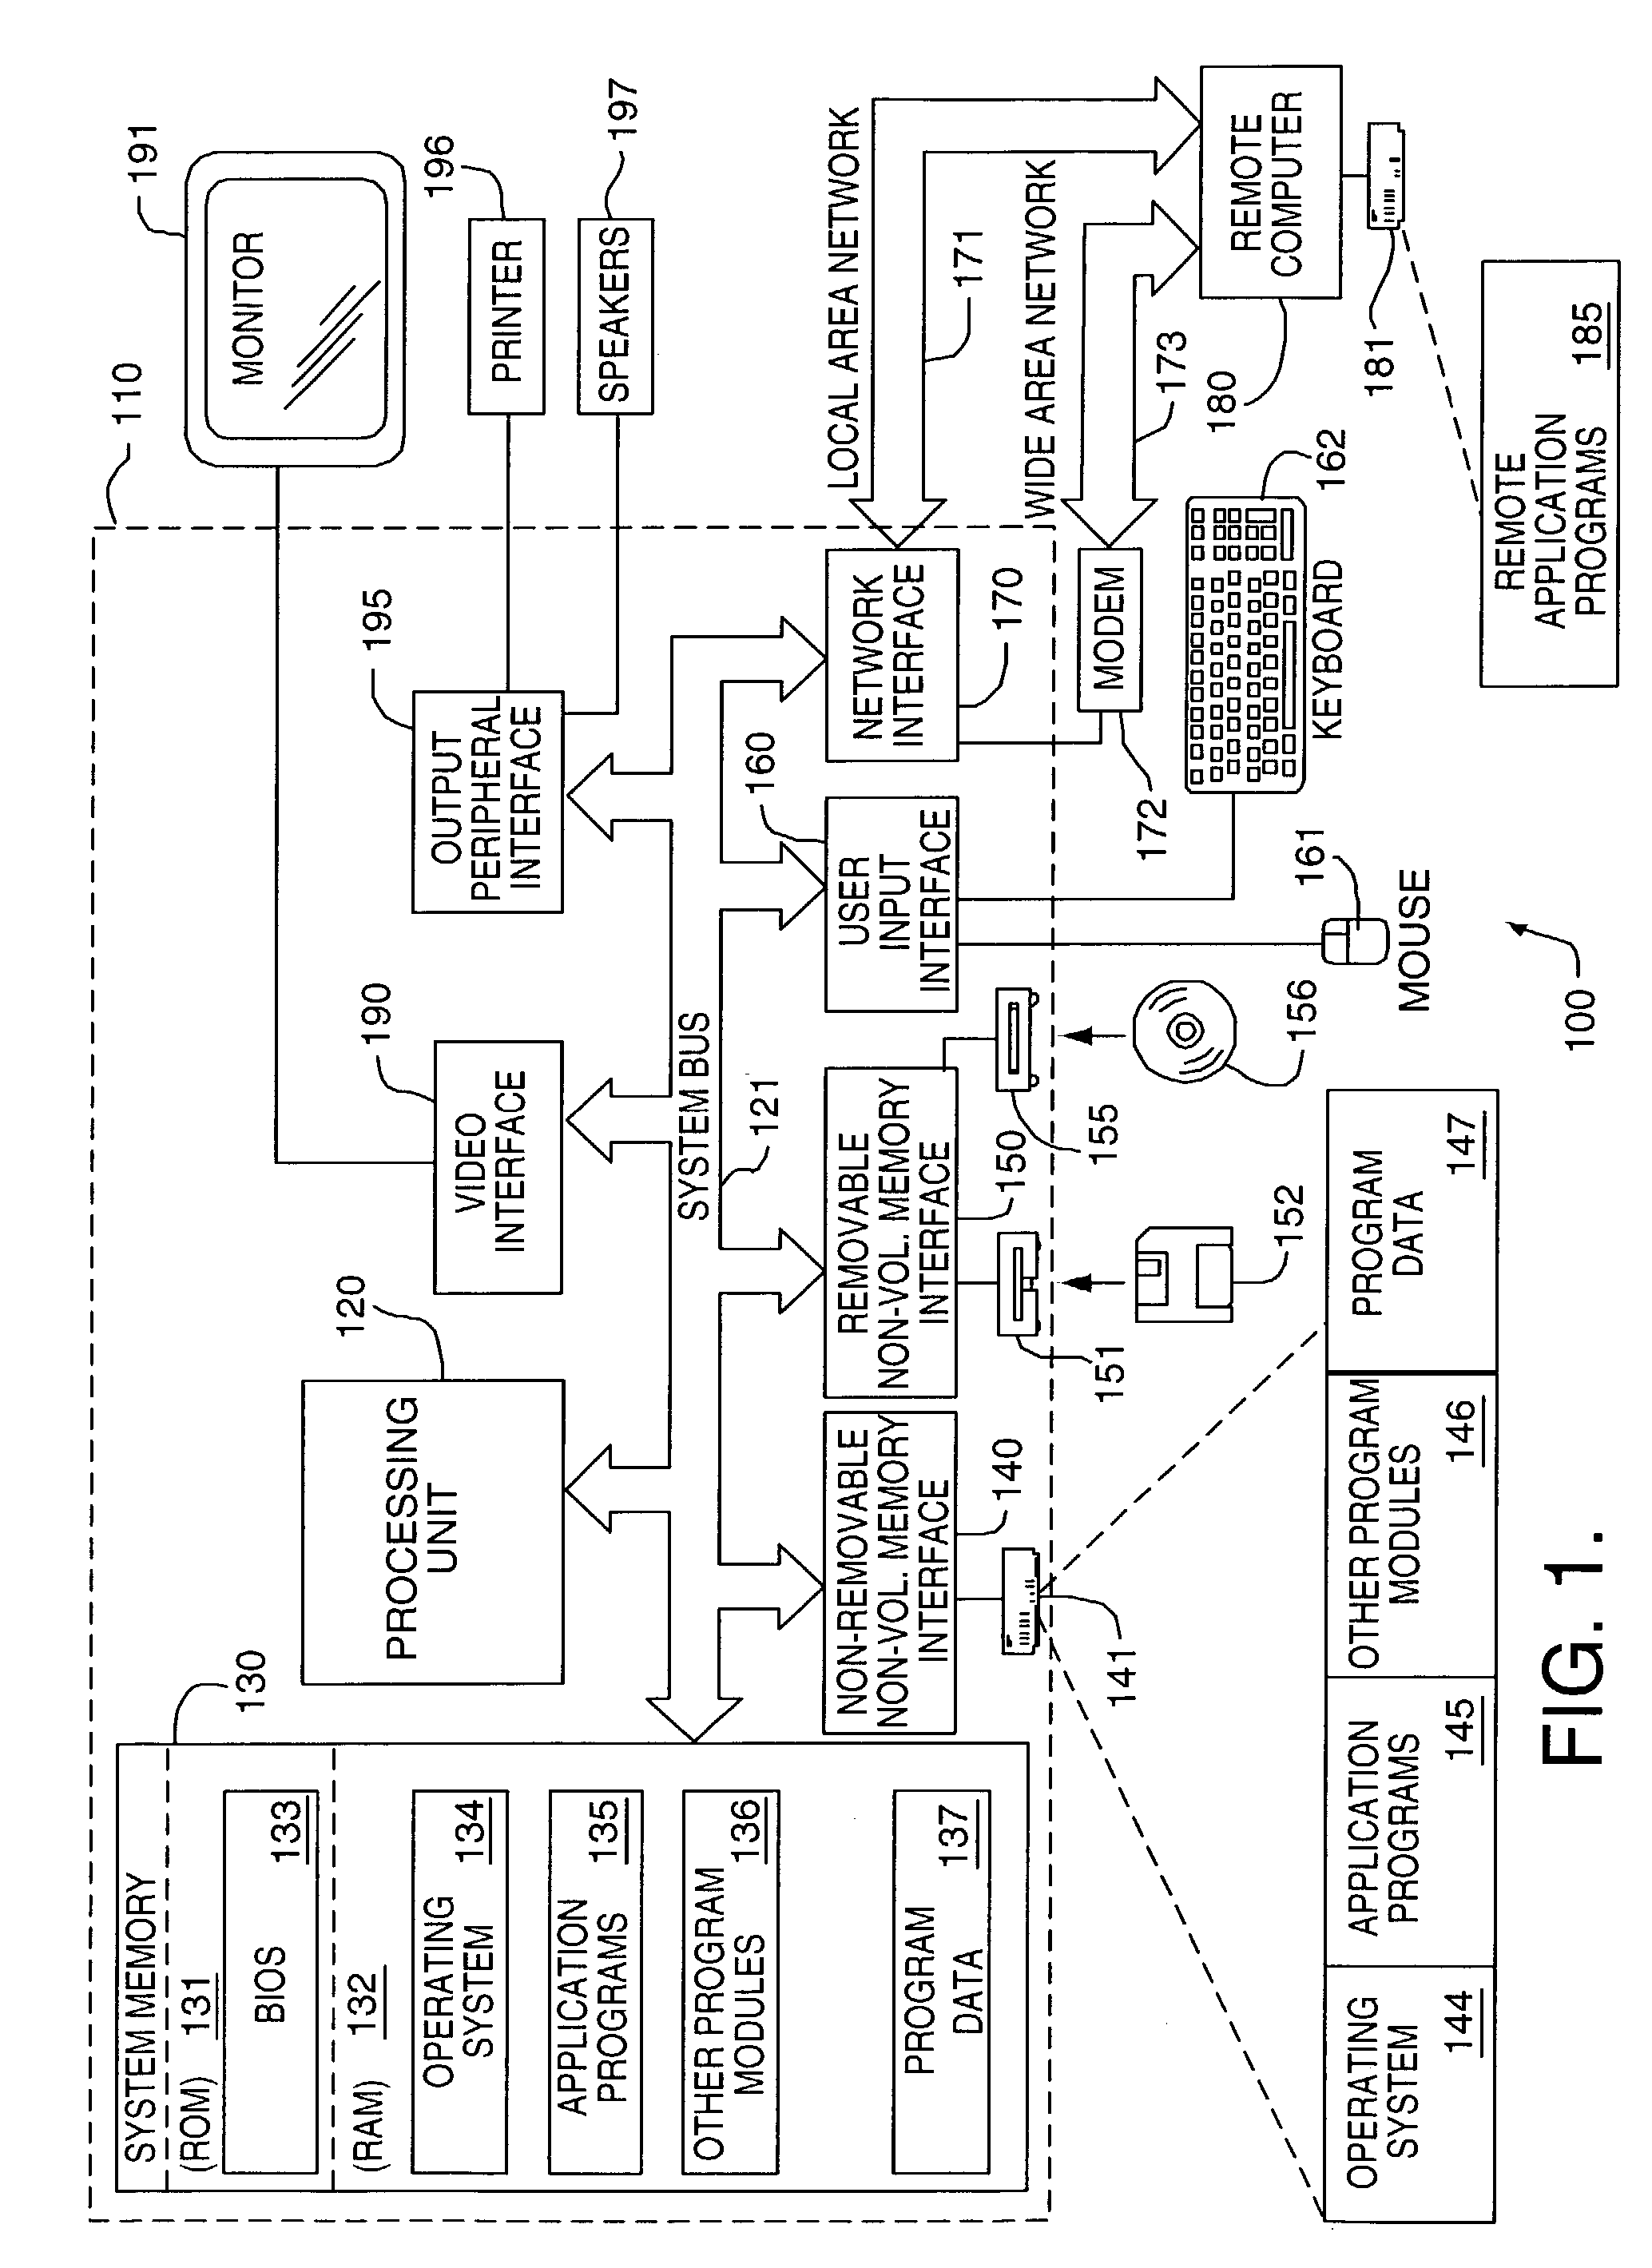 System and method for monitoring and reporting events between peripheral device and host system applications